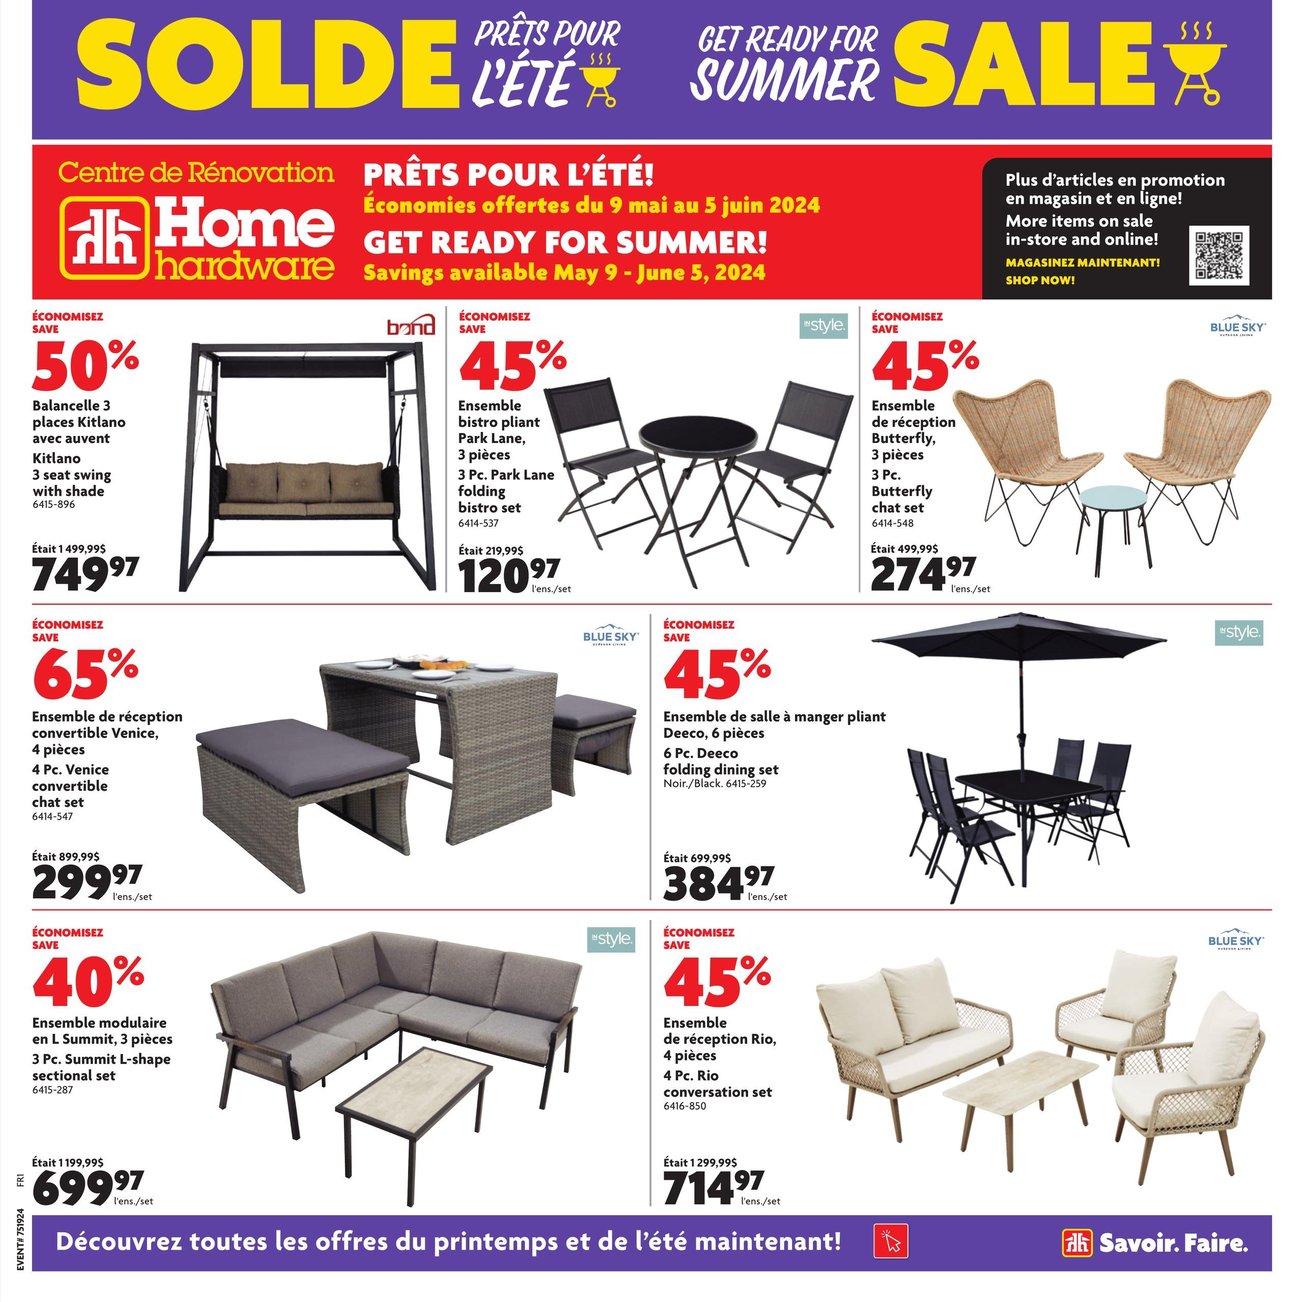 Home Hardware - Quebec - 2 Weeks of Savings - Page 12